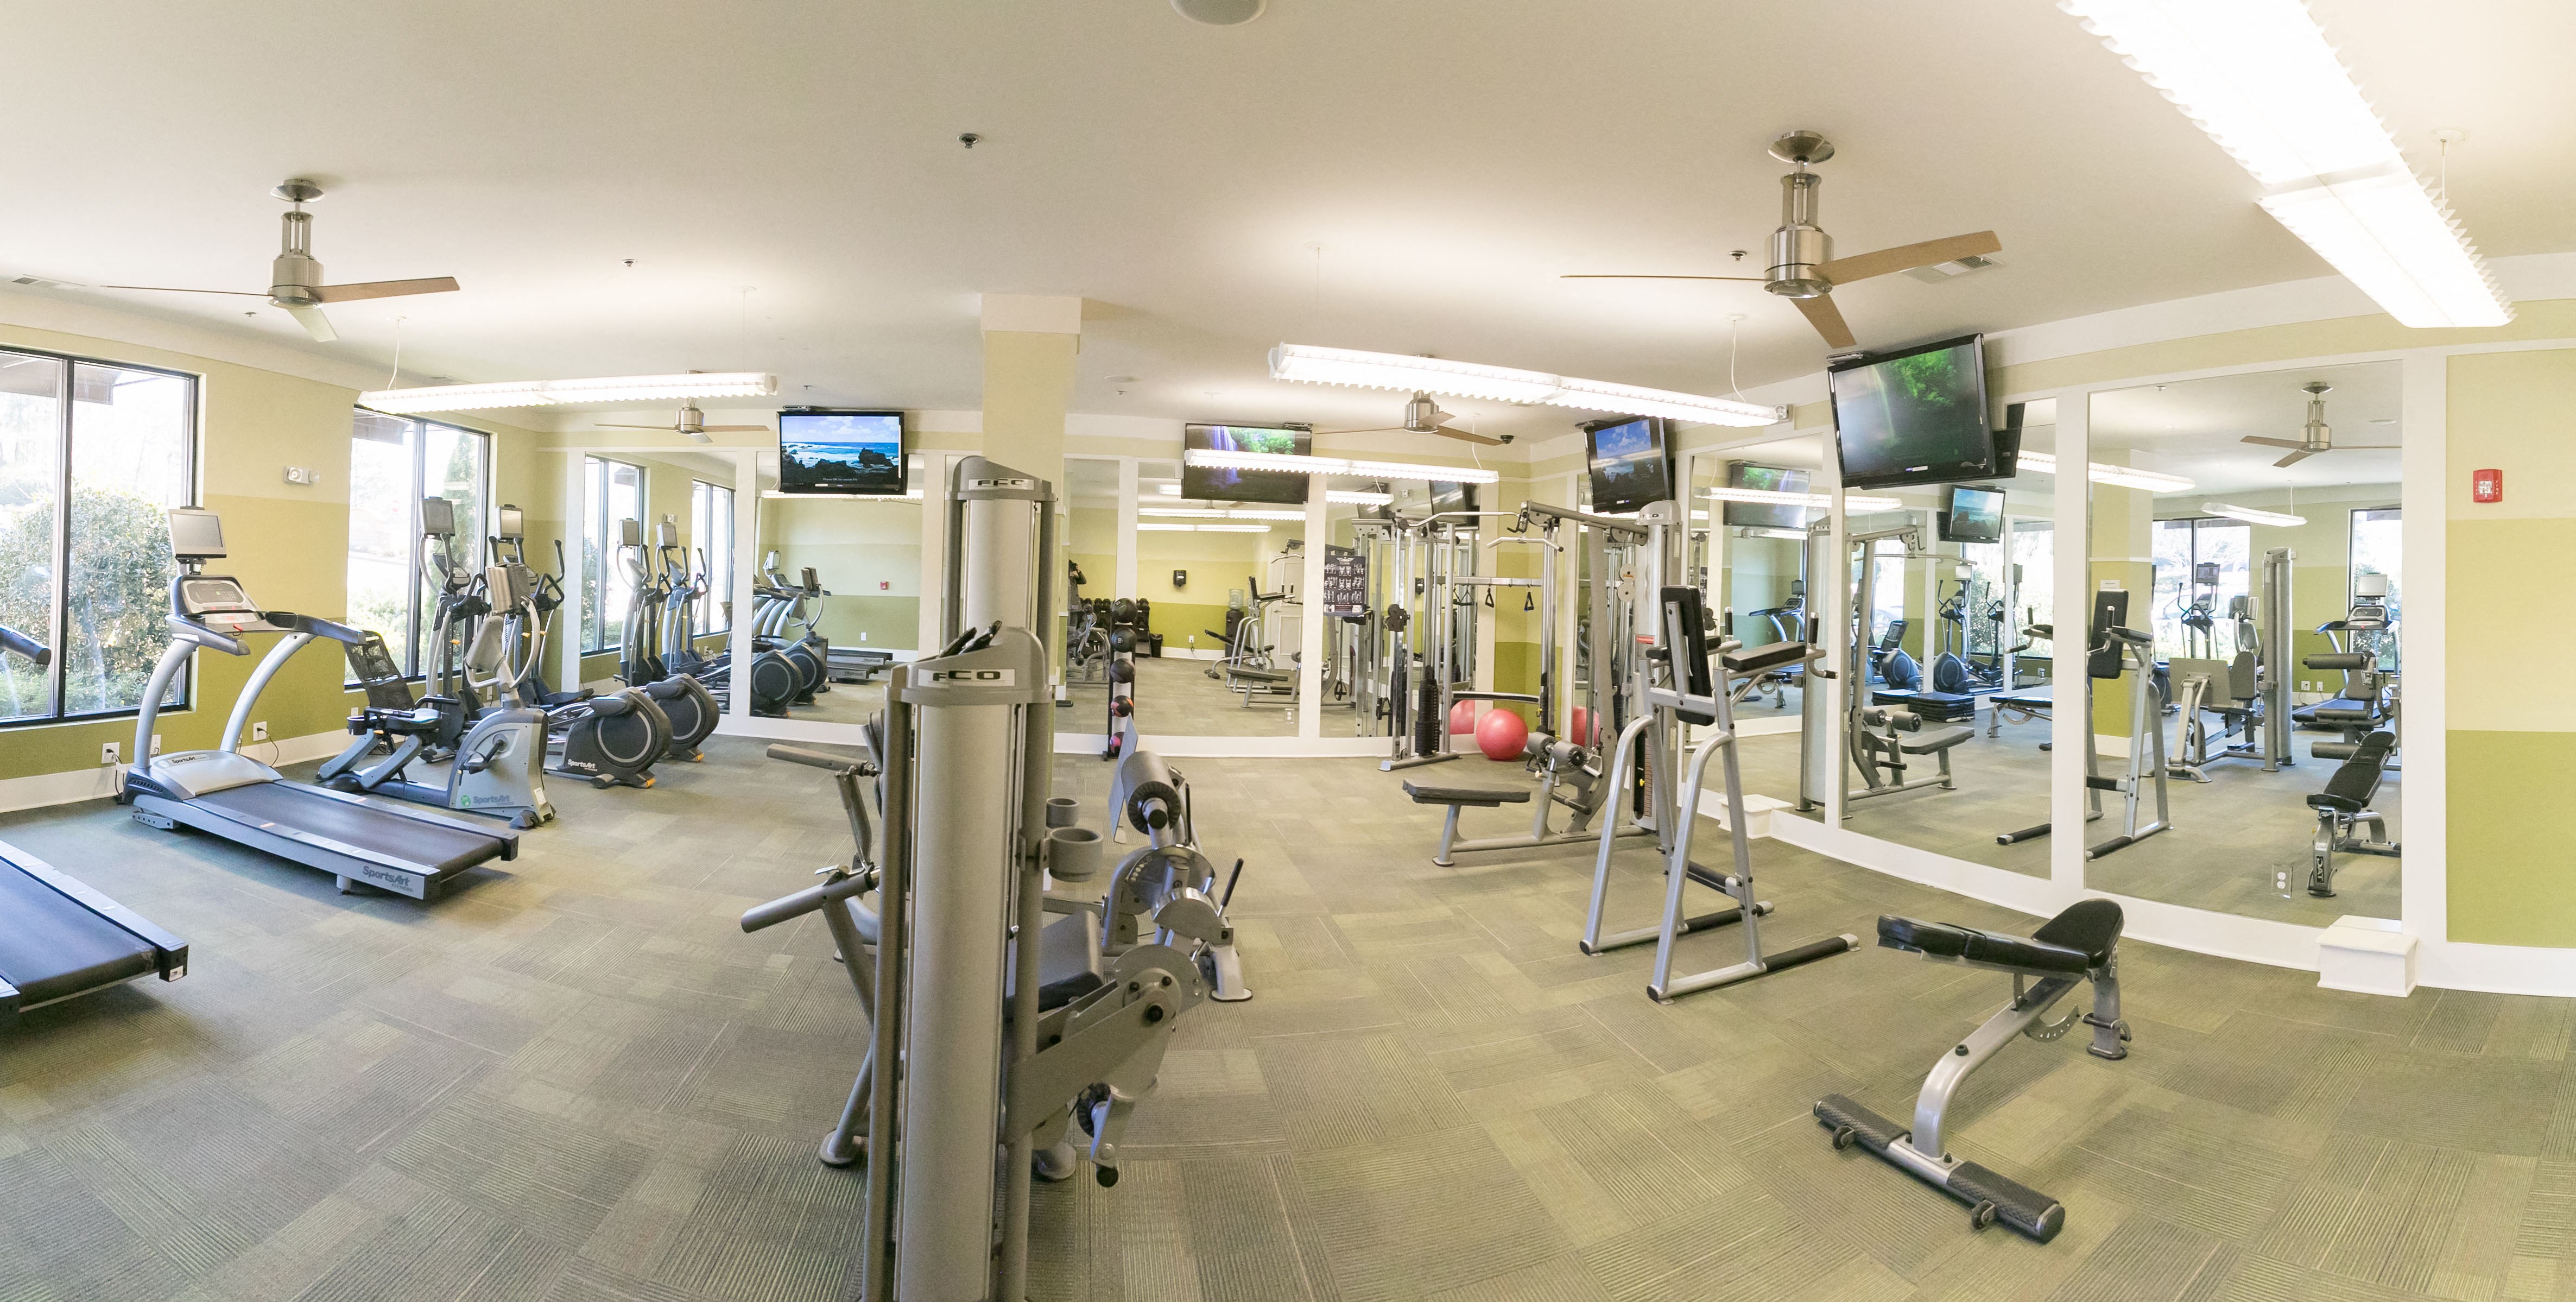 Fitness center with multiple workout equipment, mirrors, windows, and ceiling fans.